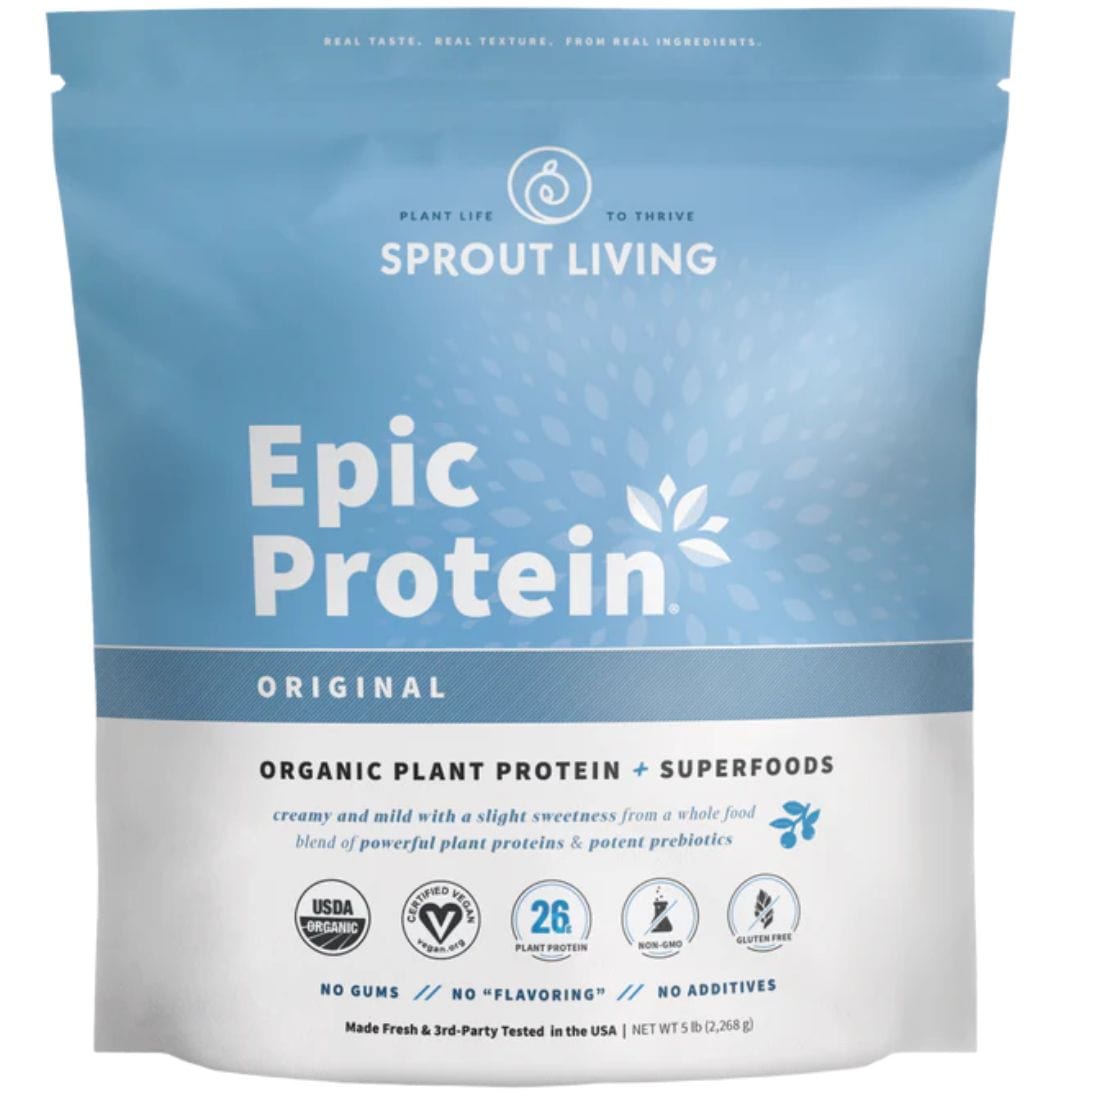 sprout-living-epic-protein-5lbs-bag-original